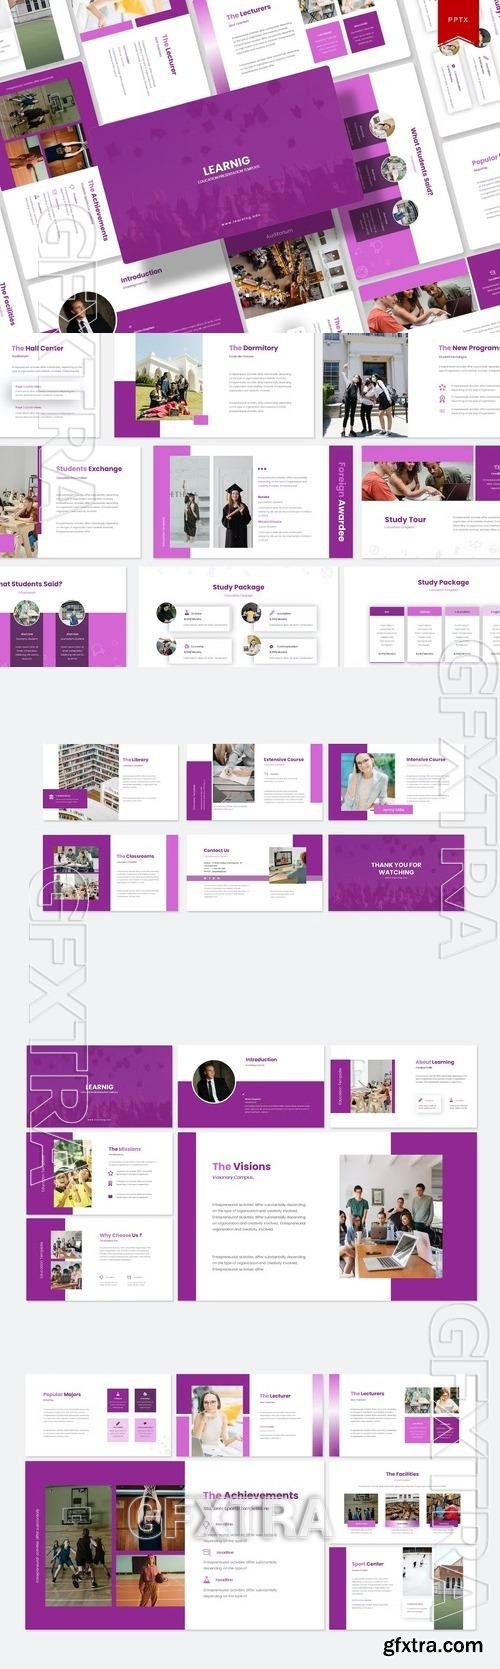 Learning Education Powerpoint Template VUEETZS